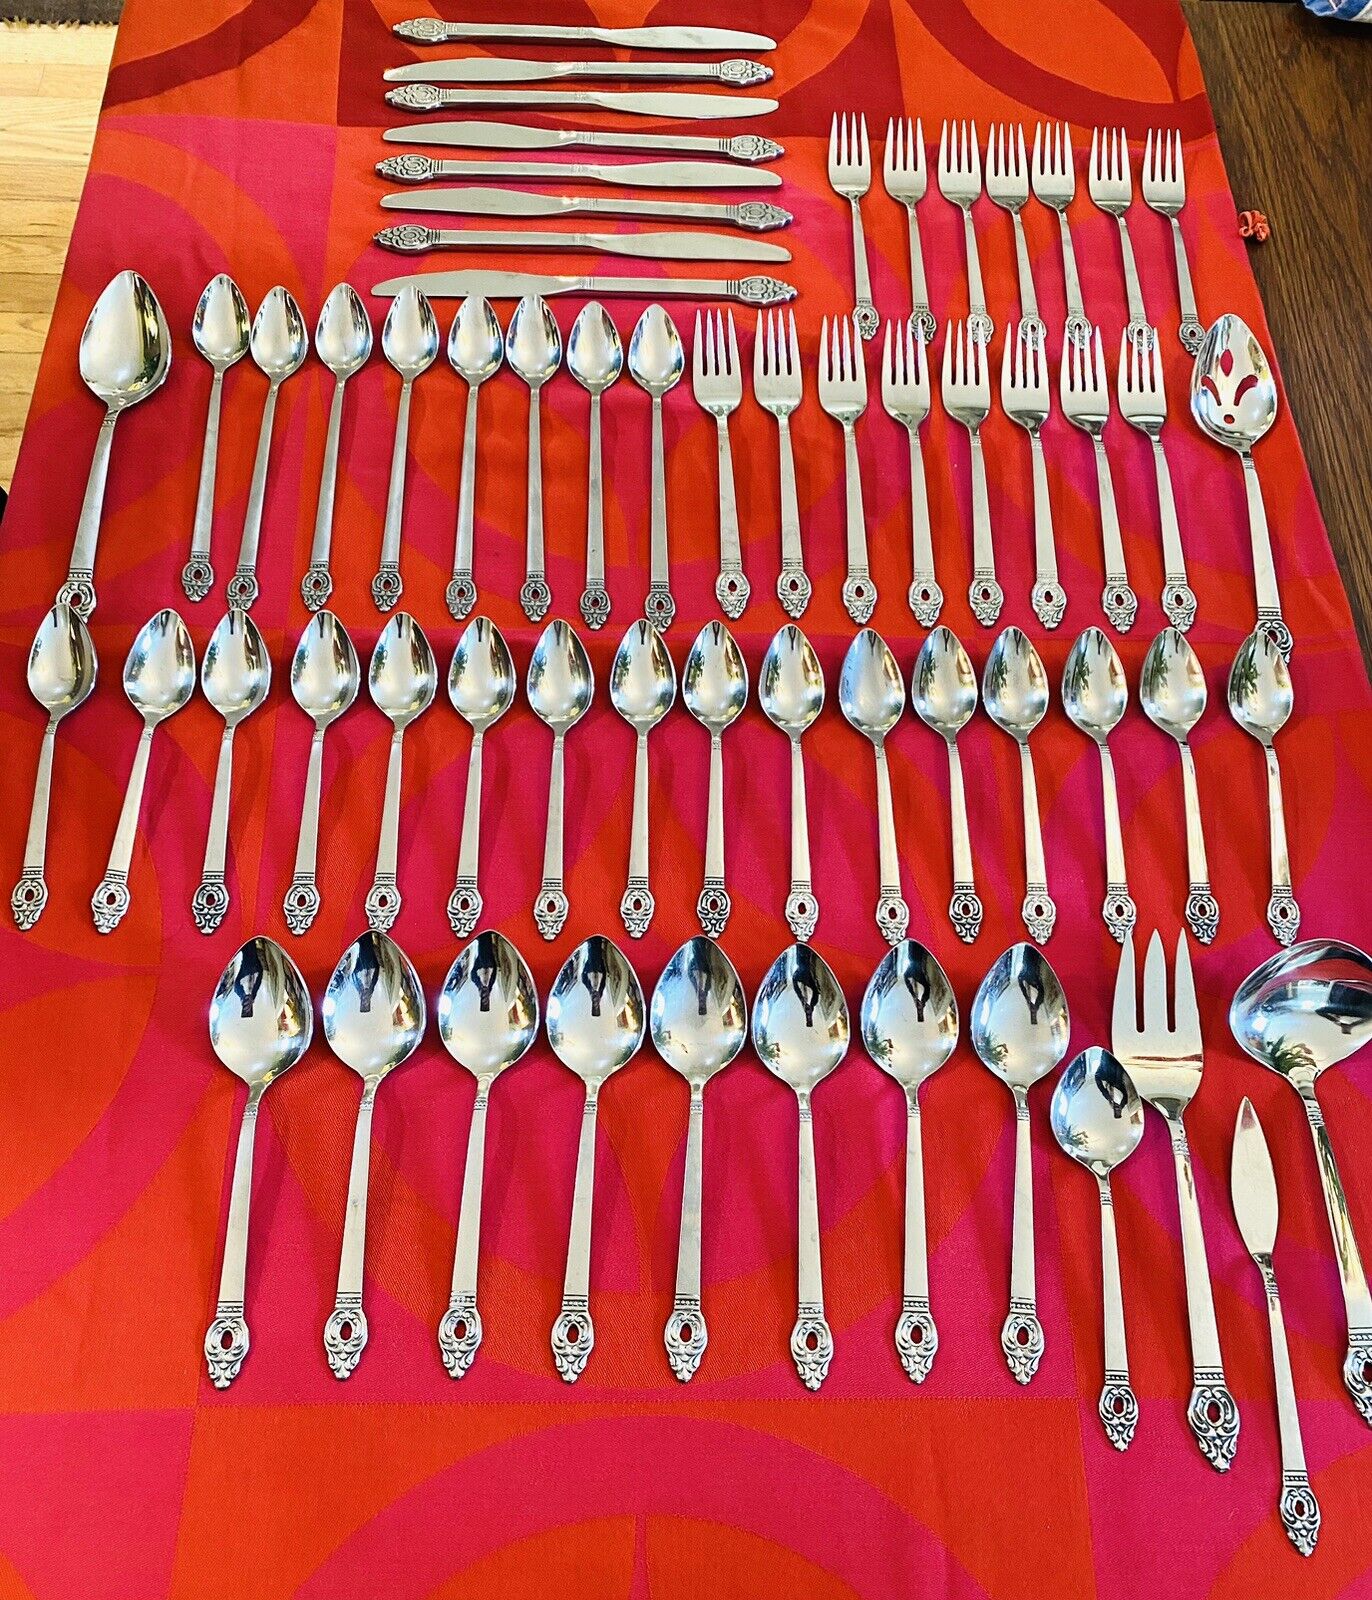 1881 Rogers Oneida Pierced Danish Court Service for 8 (-1 salad fork) 53 pieces